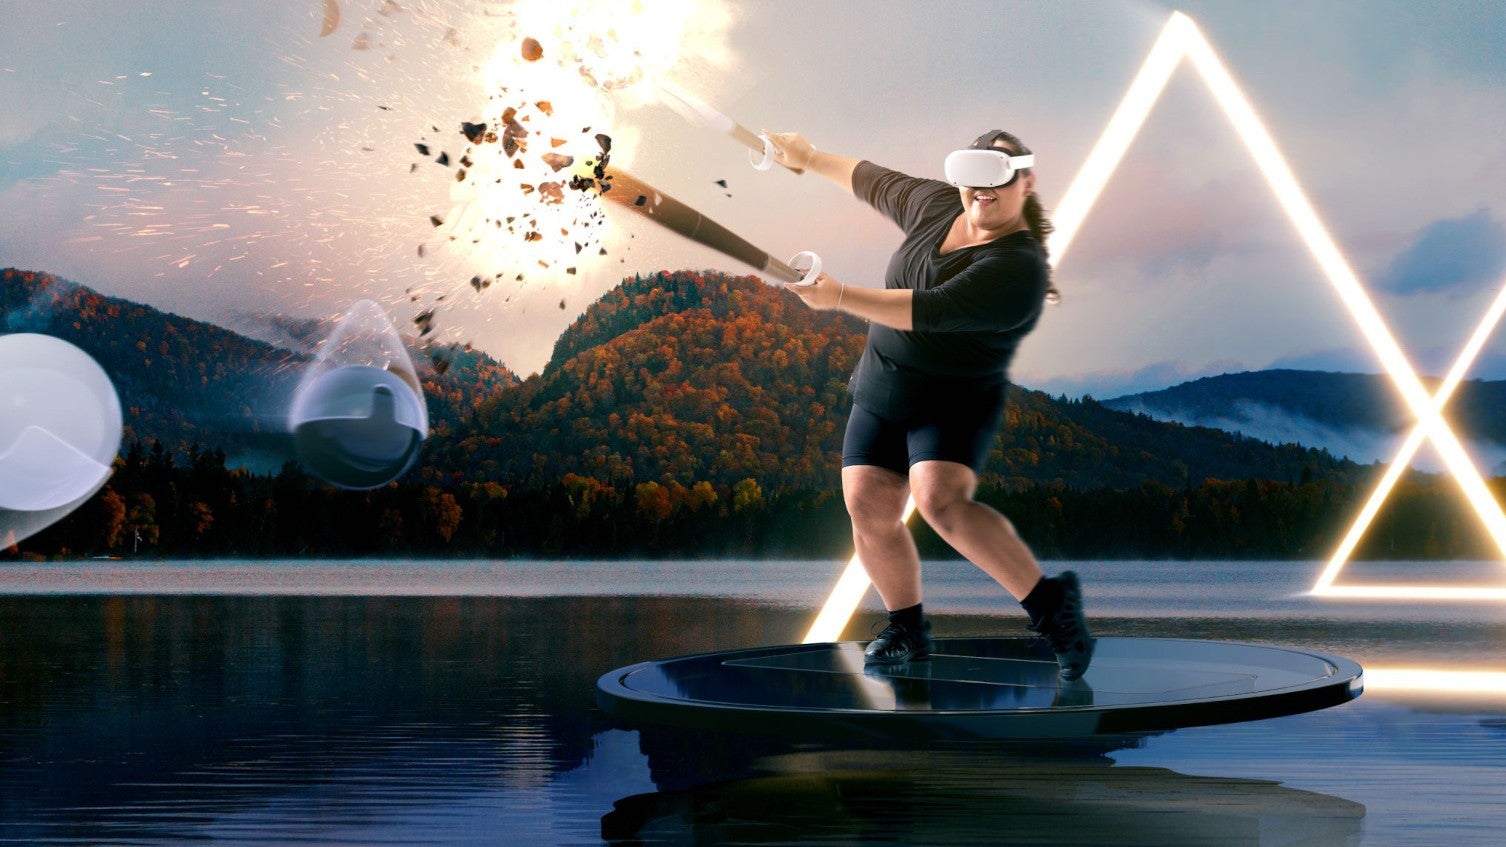 A promotional image for Supernatural, a VR Fitness game. A woman wearing an Oculus Quest headset swings a bat at an exploding object